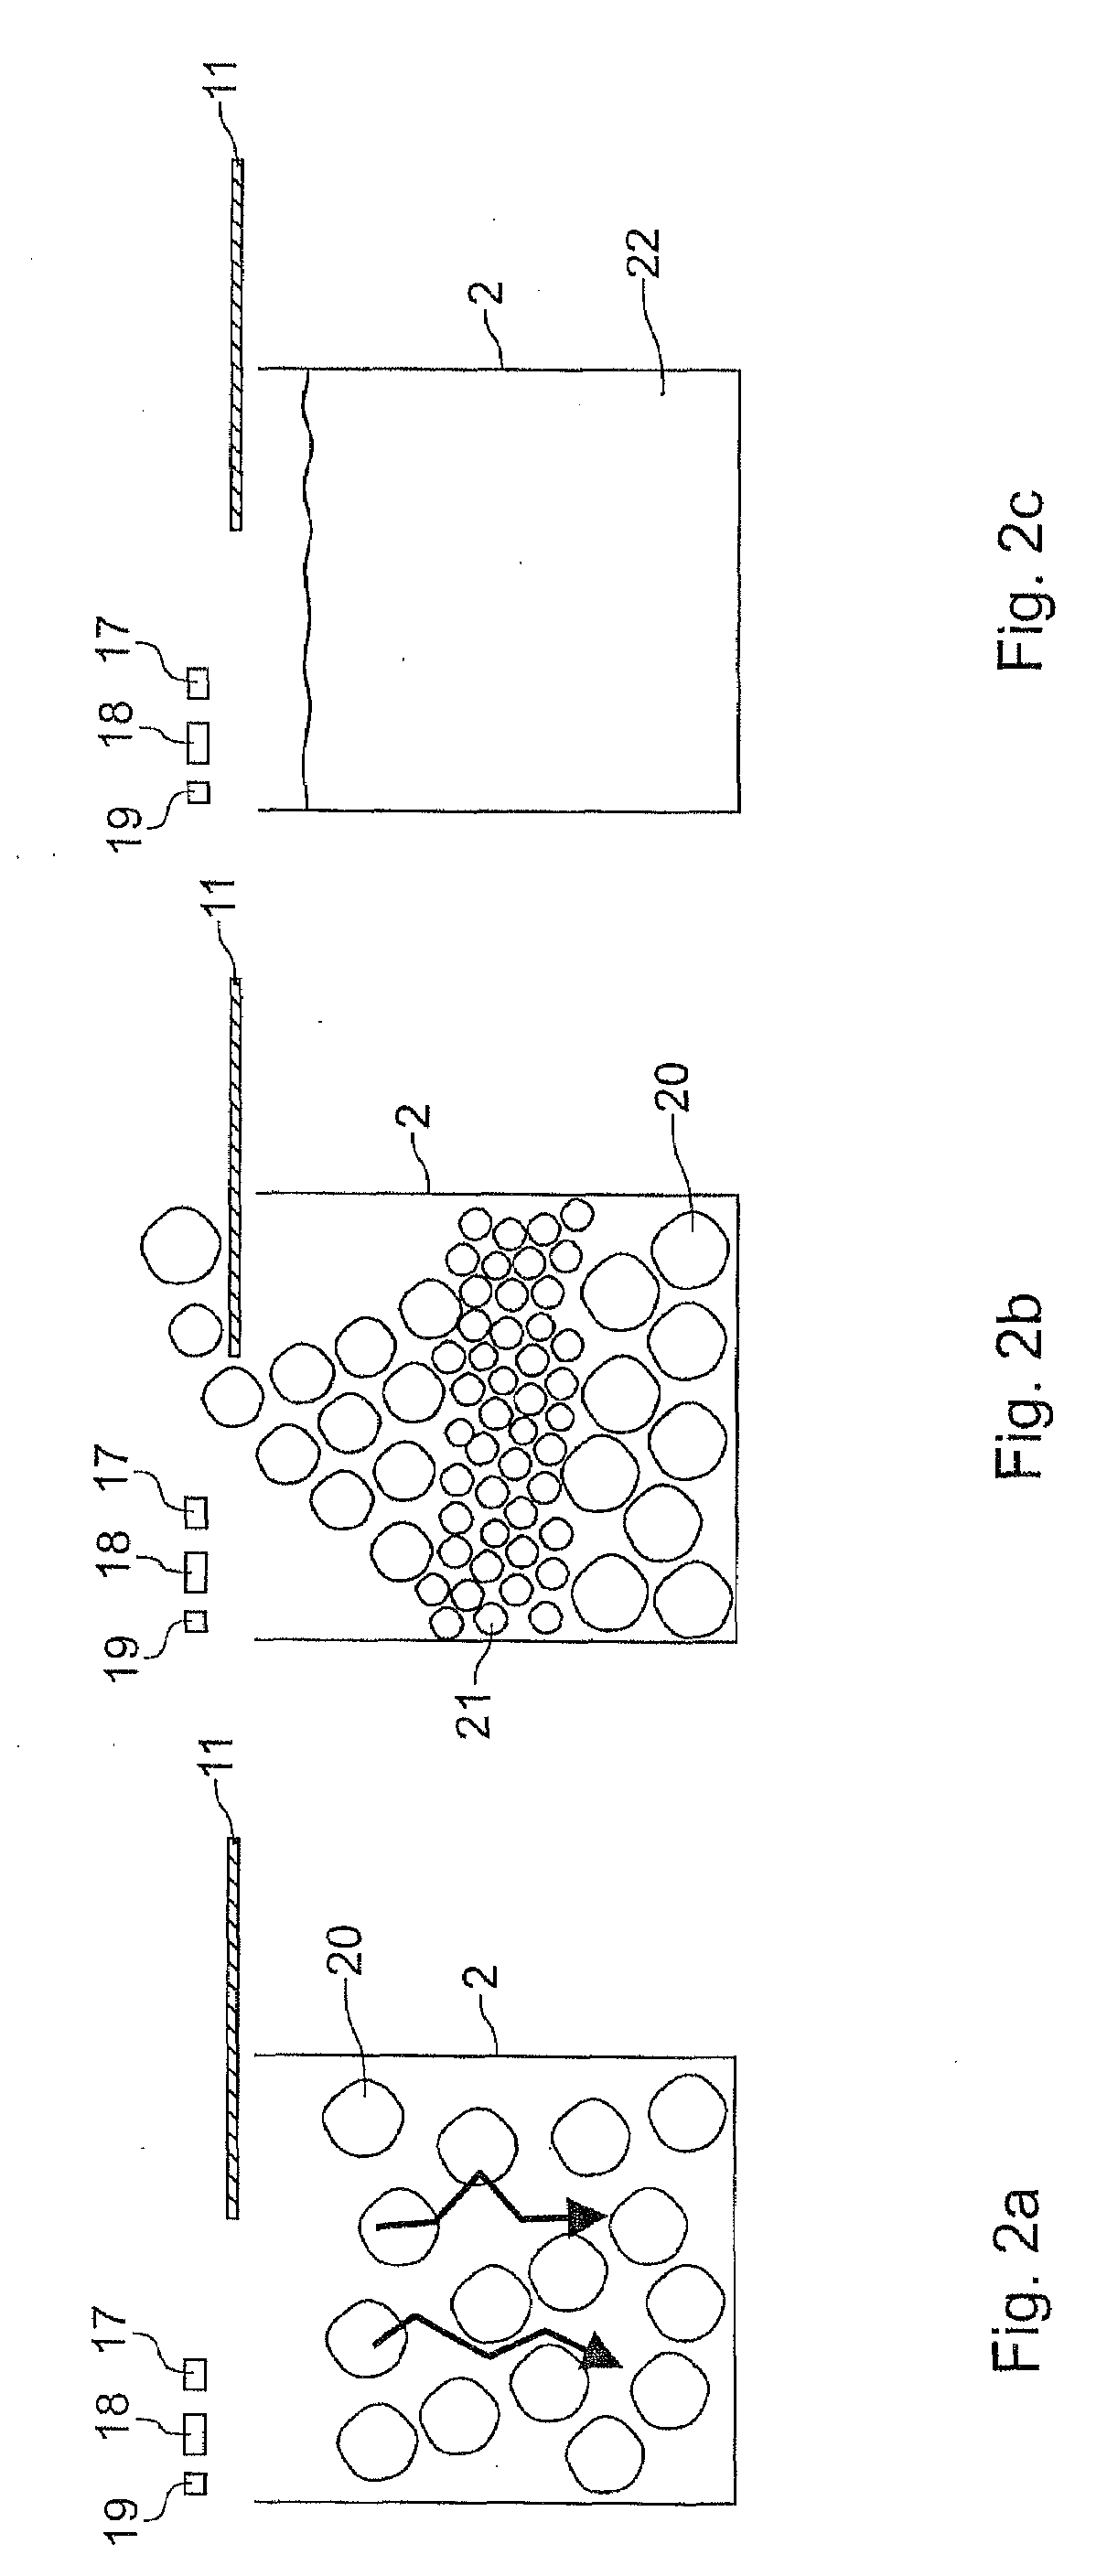 Method for producing a monocrystalline or polycrystalline semiconductore material